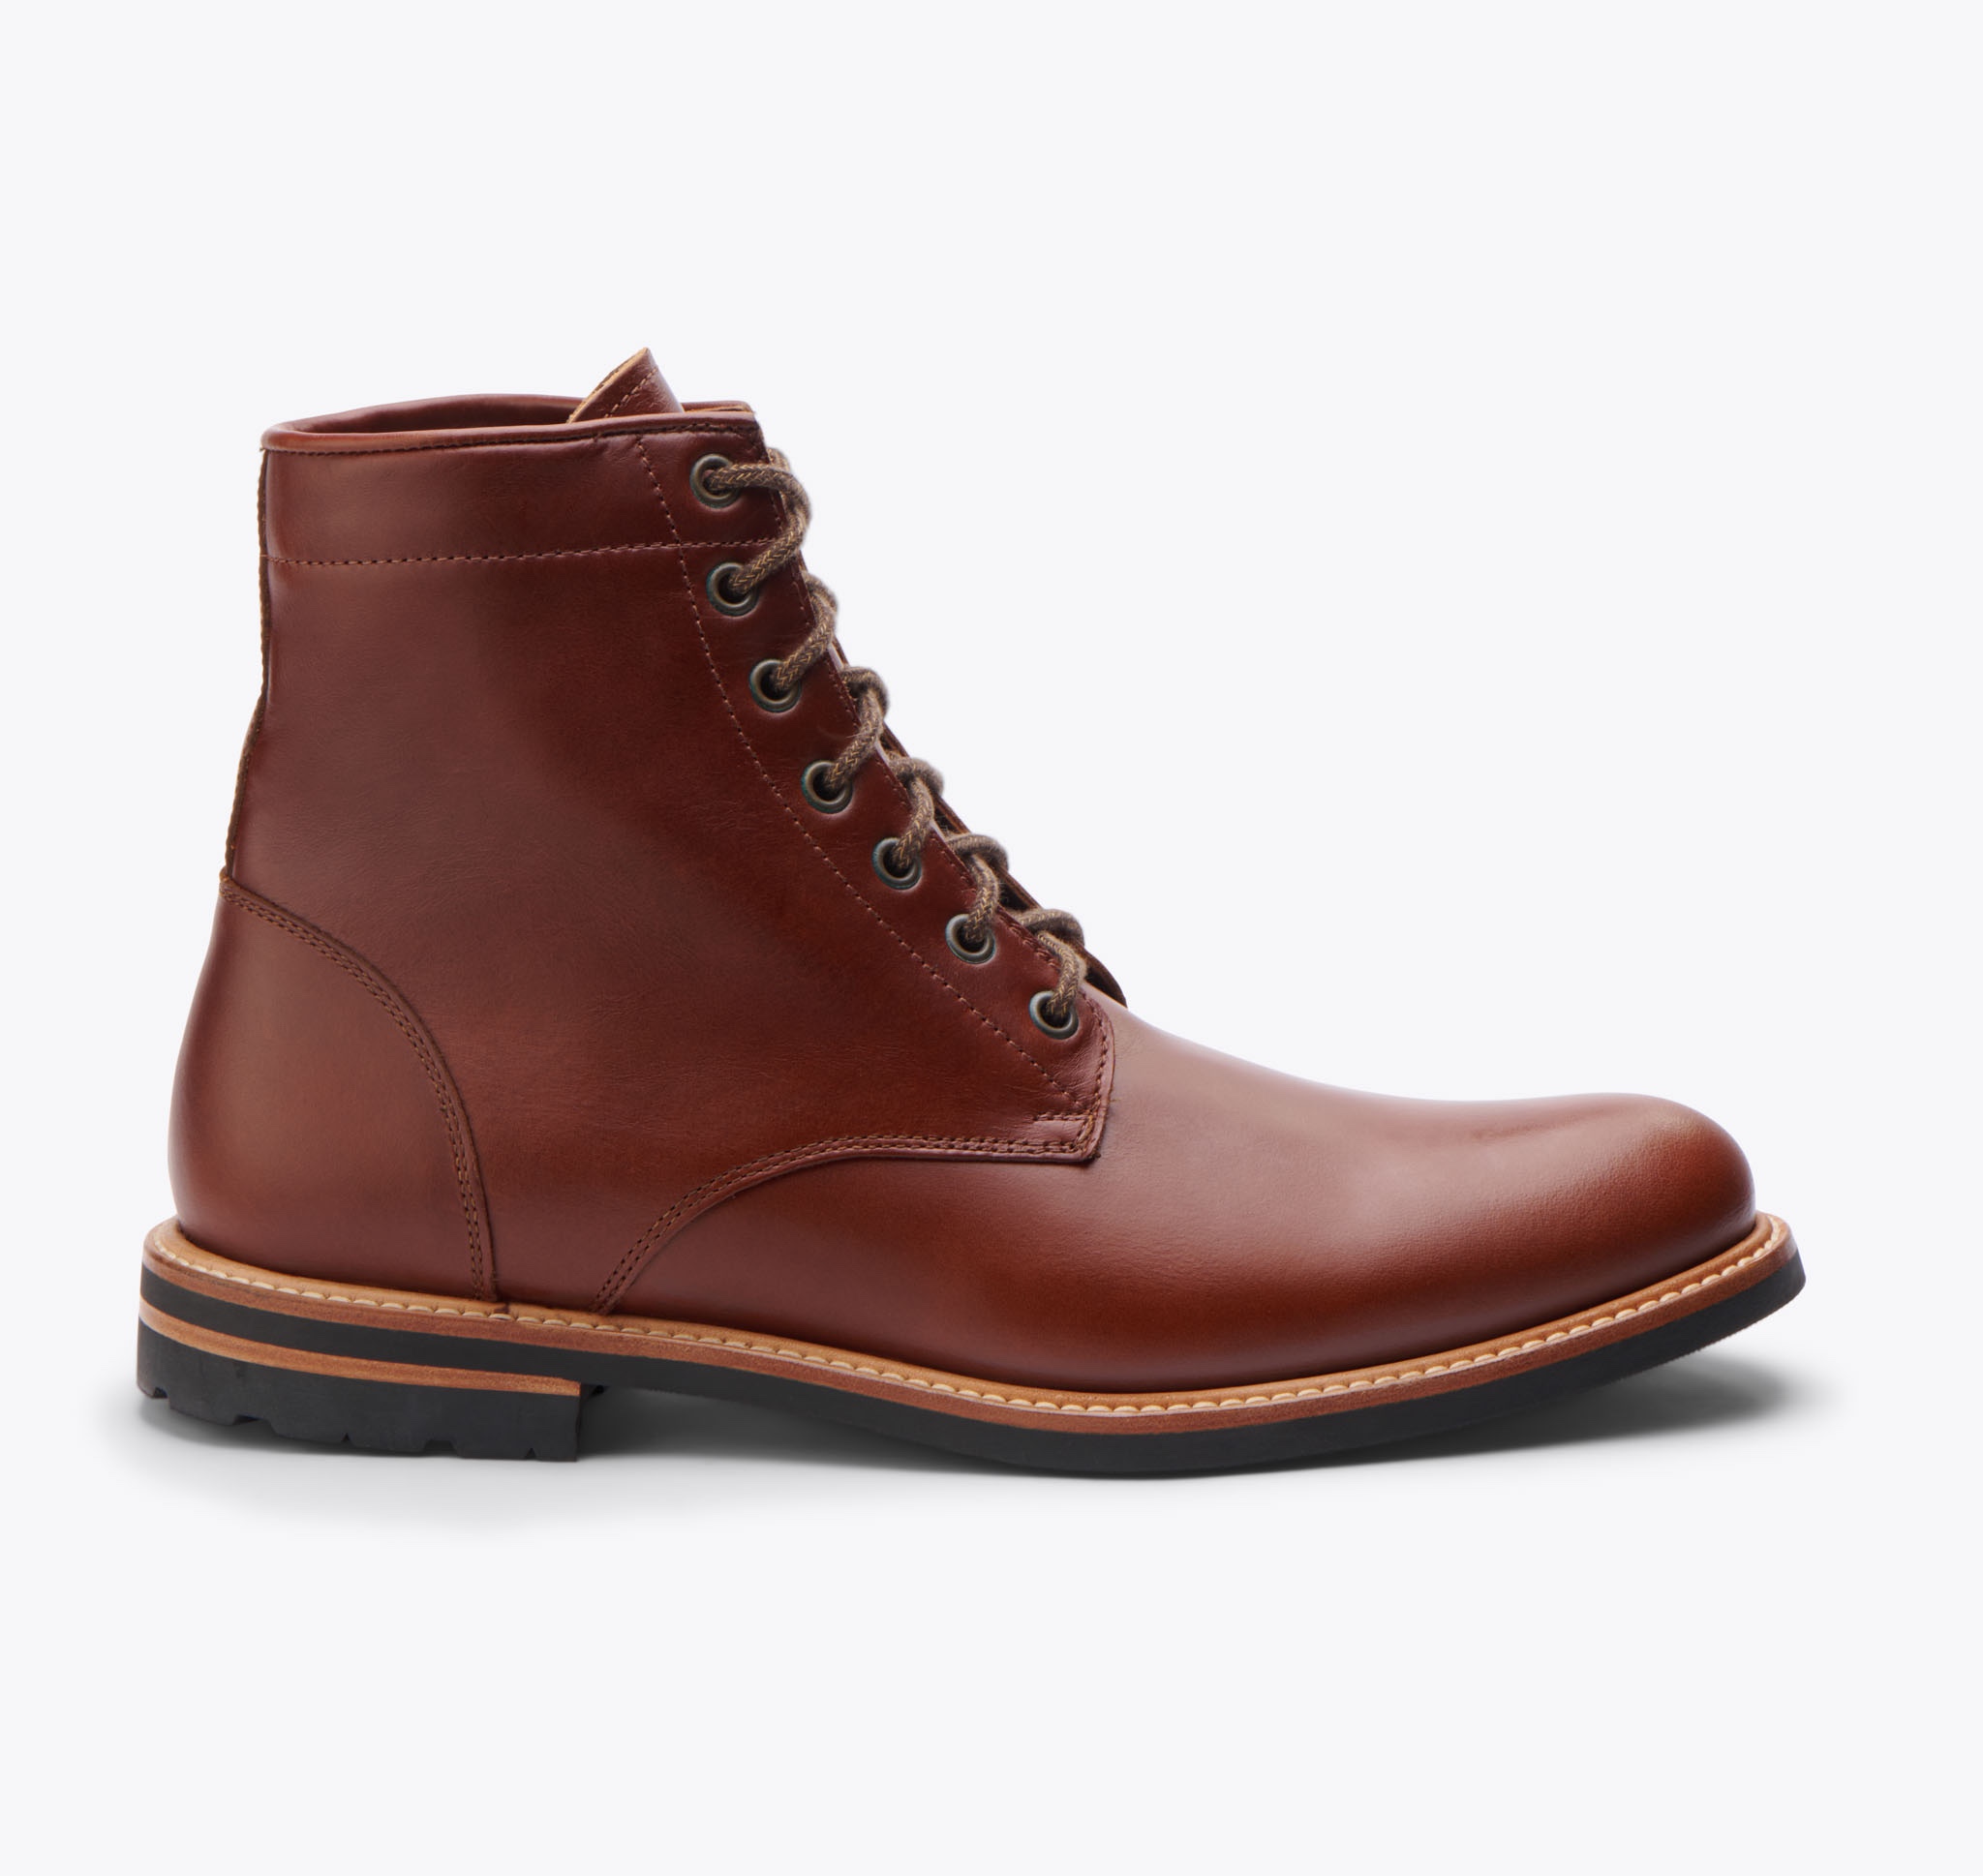 Nisolo All-Weather Andres Boot Brandy - Every Nisolo product is built on the foundation of comfort, function, and design. 